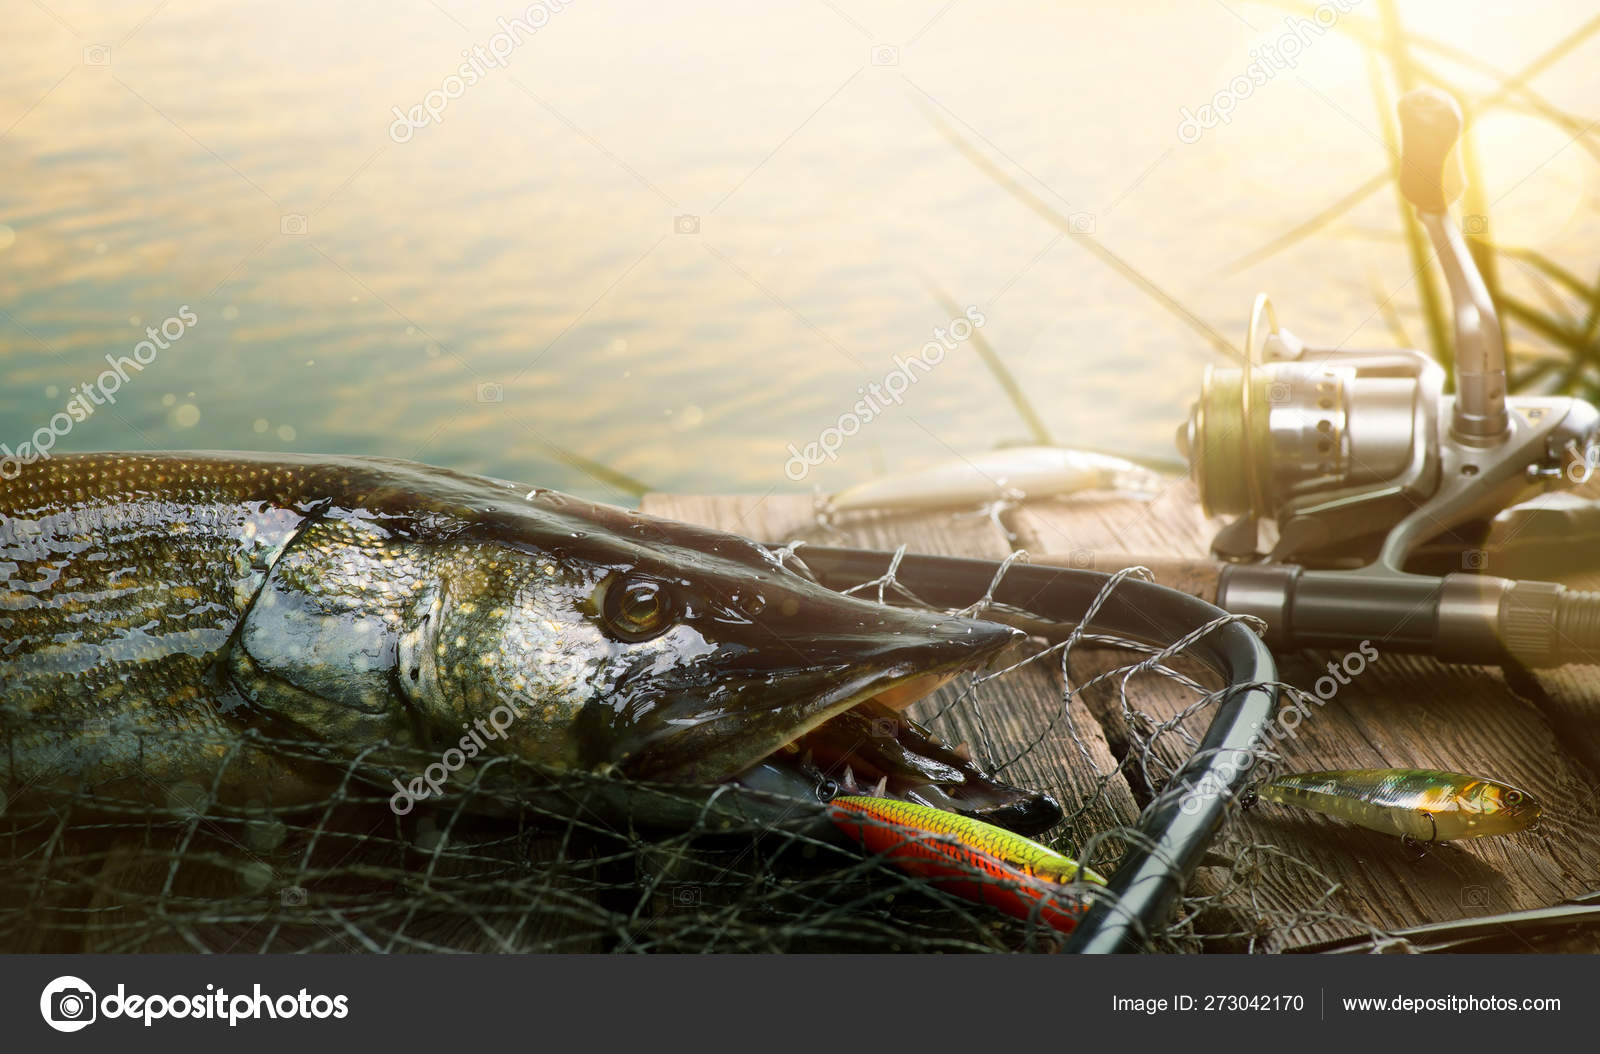 Summer Fishing background. Fishing lure and trophy Pike — Stock Photo ©  Konstanttin #273042170